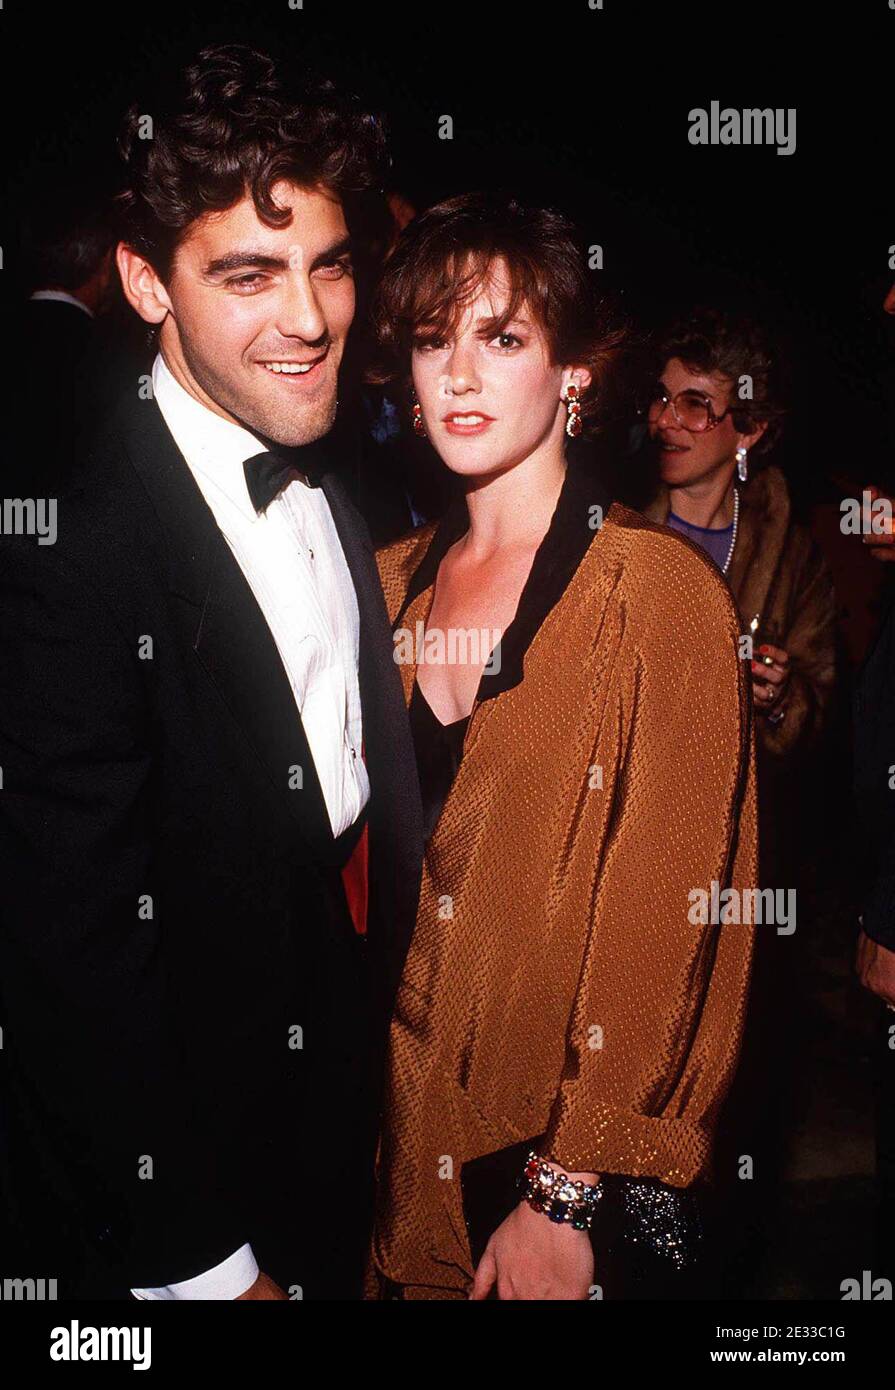 George Clooney And Talia Balsam 1986 Credit: Ralph Dominguez/MediaPunch Stock Photo